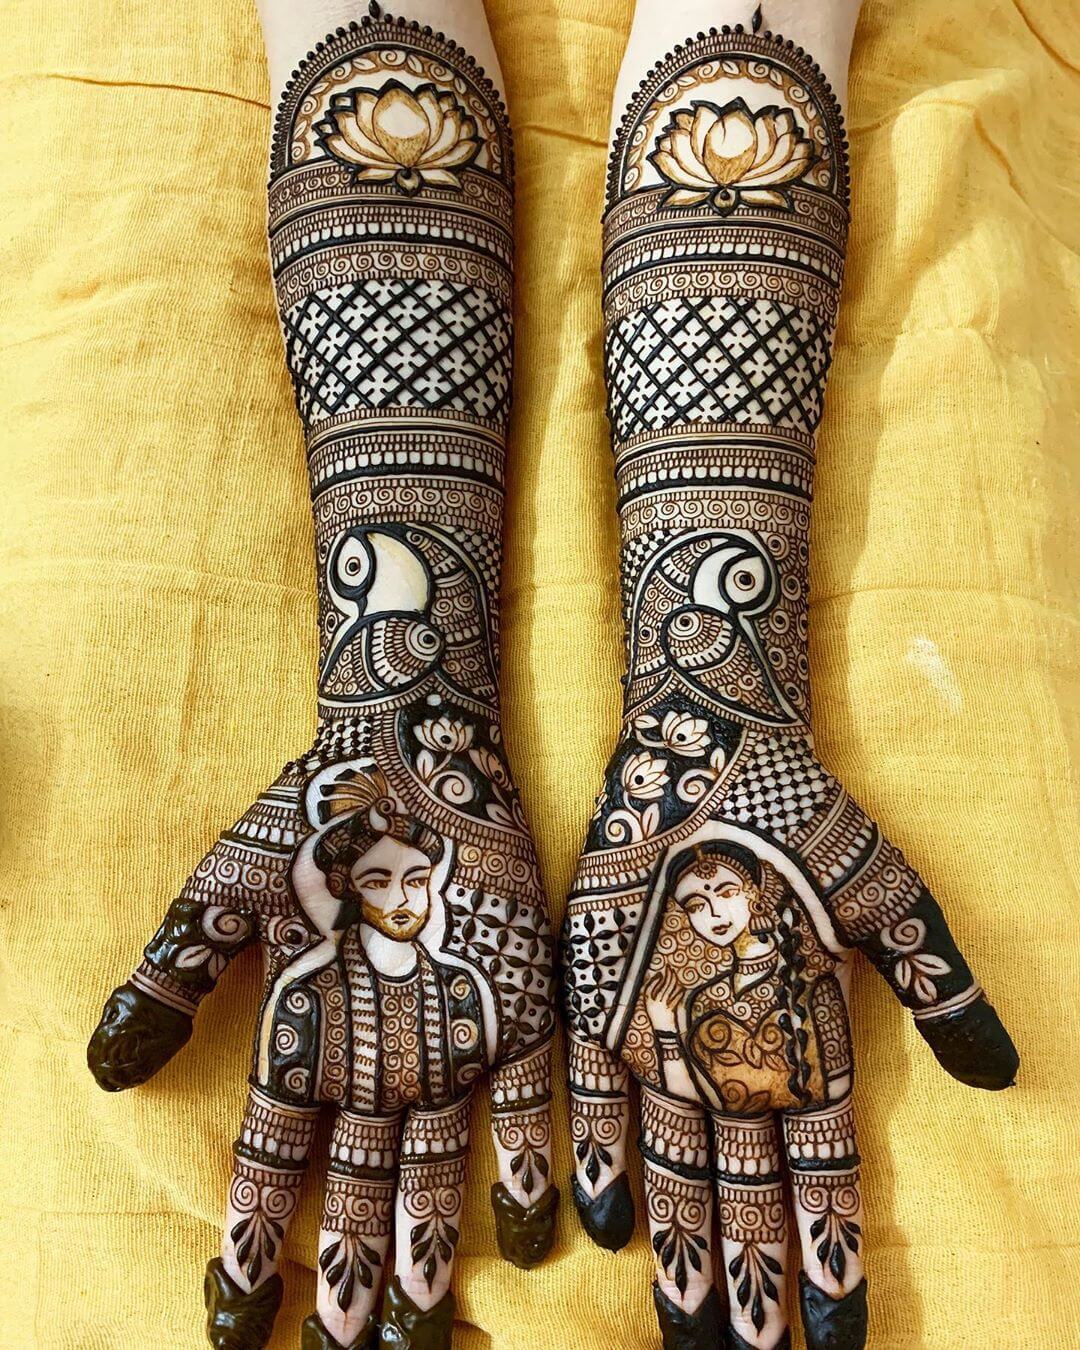 Fashioning full henna designs for the bride's hands.